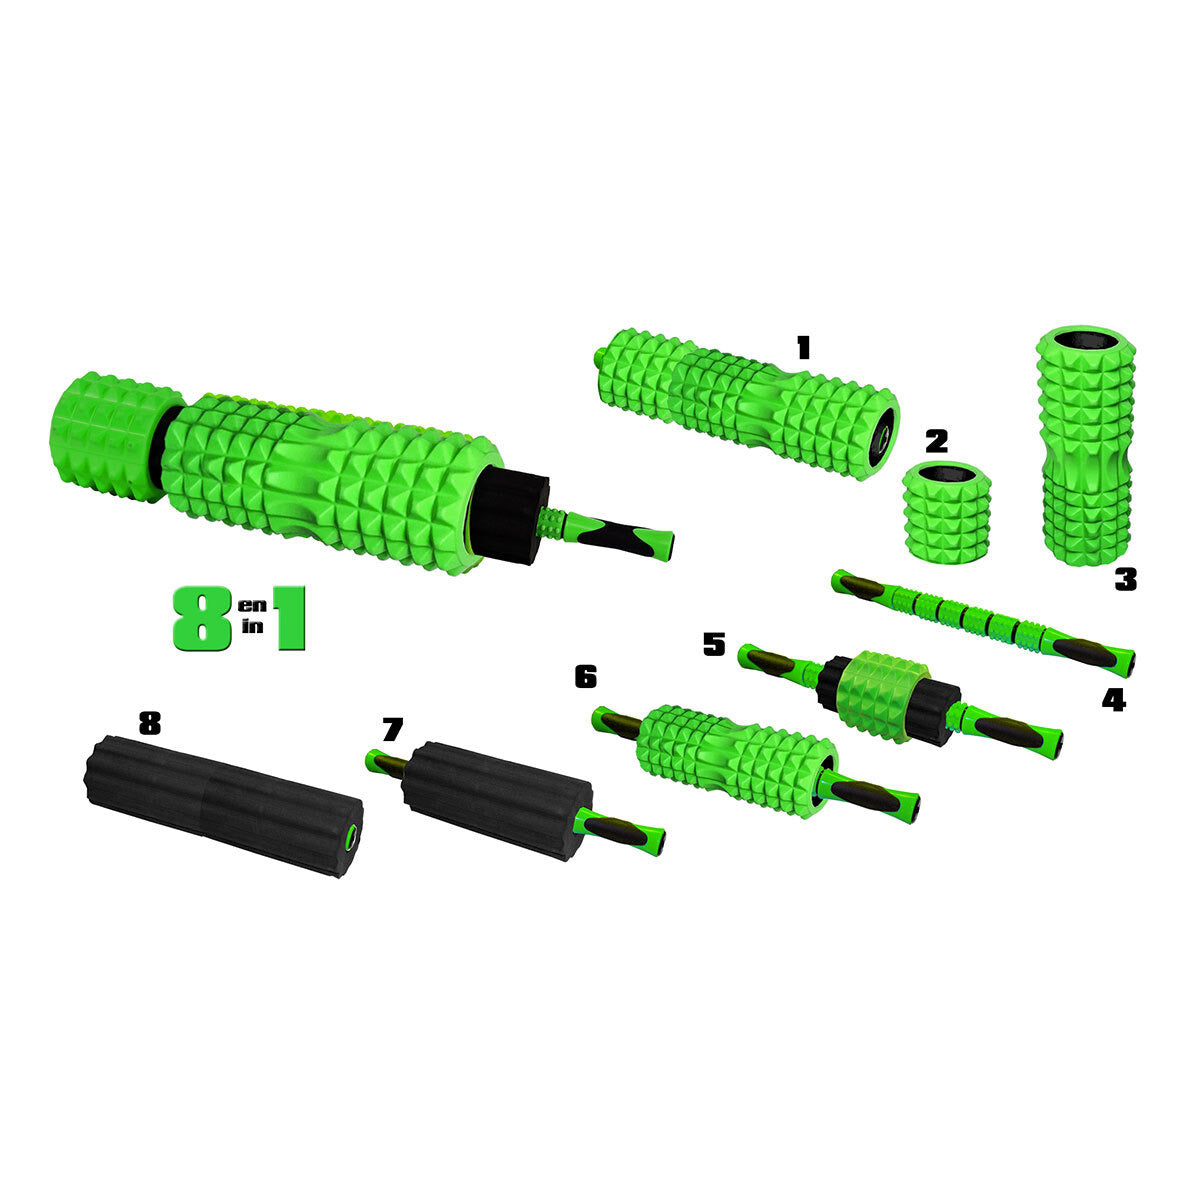 ATF 8-in-1 Trigger Point Foam Roller Set Fitness Accessories ATF Sports